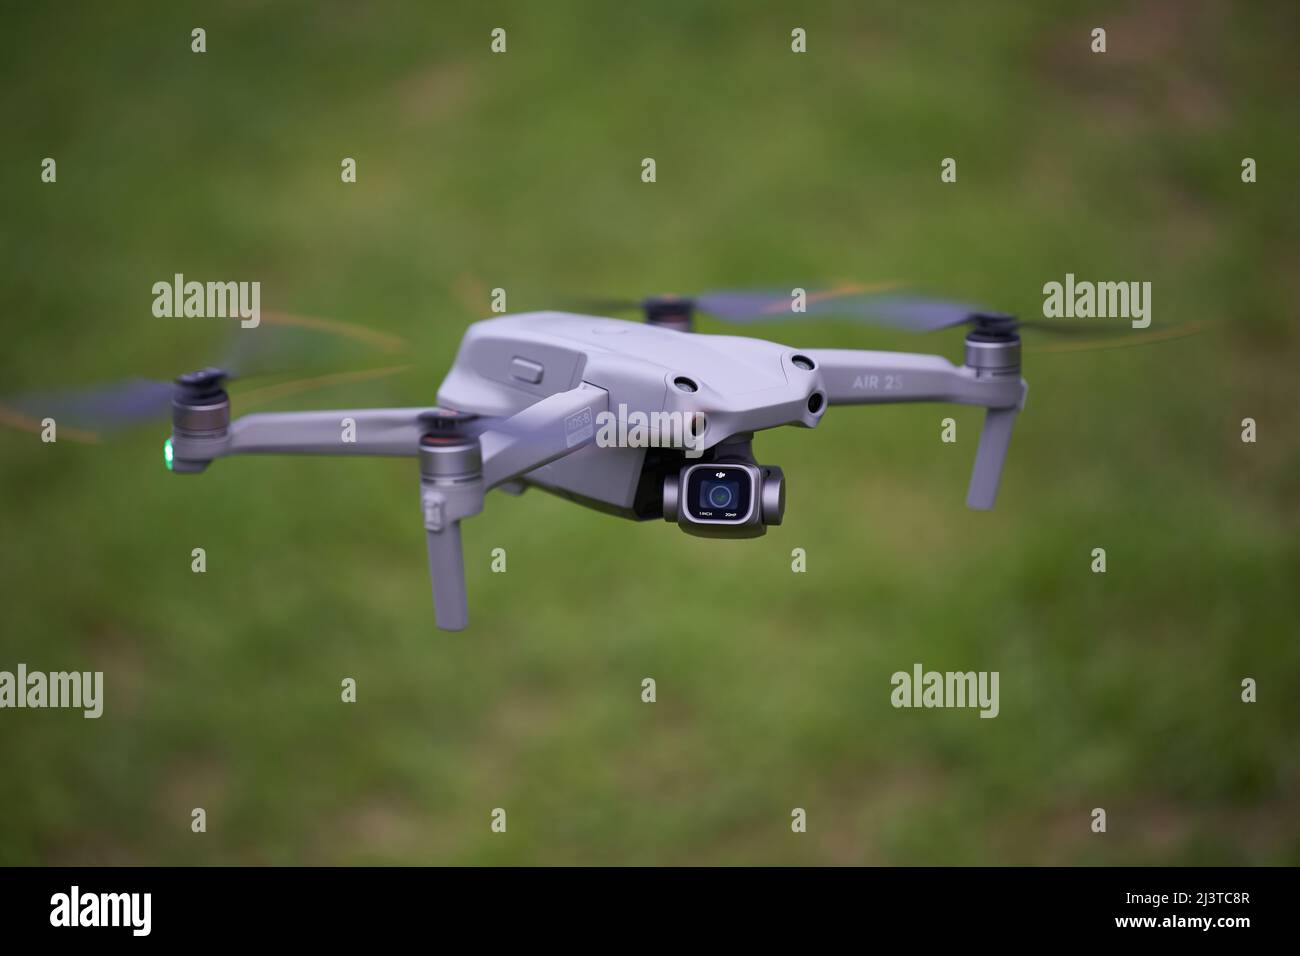 Nürtingen, Germany - June 26, 2021: Modern Dji air 2s drone. Gray multicopter with sensors and 1 Inch camera. Green meadow depth of field. High angle Stock Photo